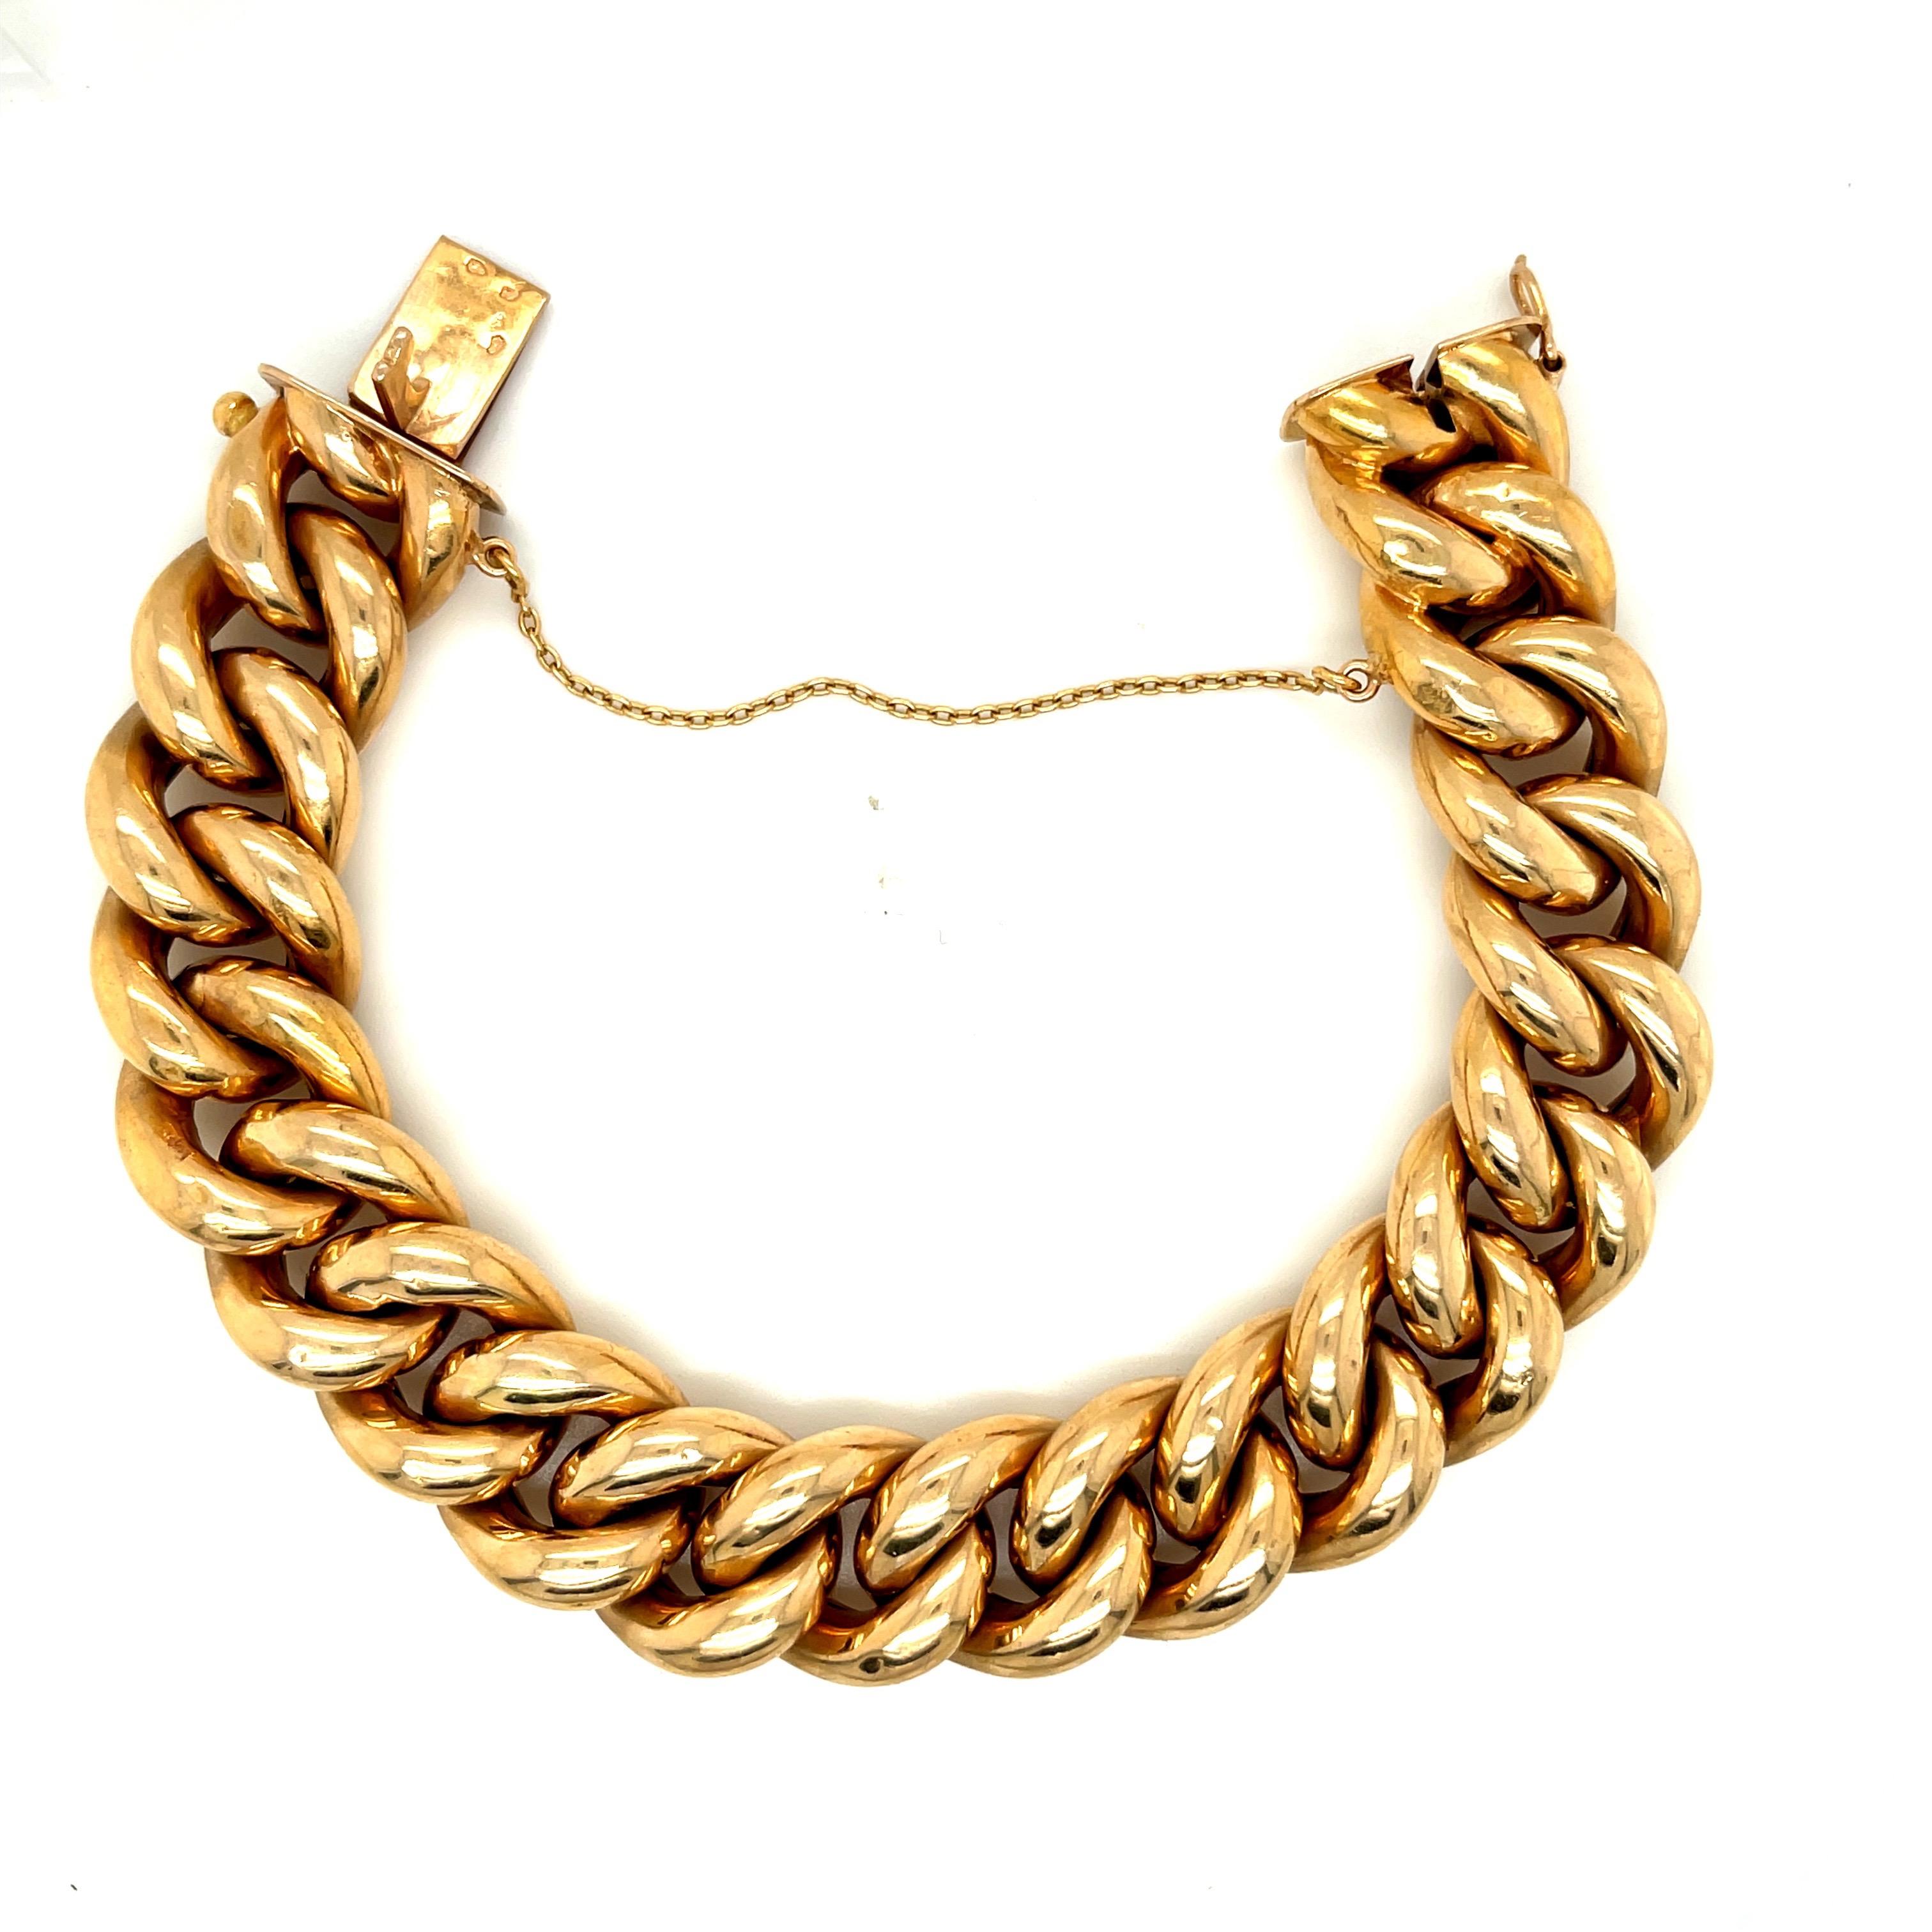 Classic vintage 18k yellow gold French curblink bracelet circa 1960. This wearable link bracelet is hollow form and has a nice feel to it. The bracelet has a tongue clasp and the bracelet has French hallmarks. There is a safety chain, The bracelet